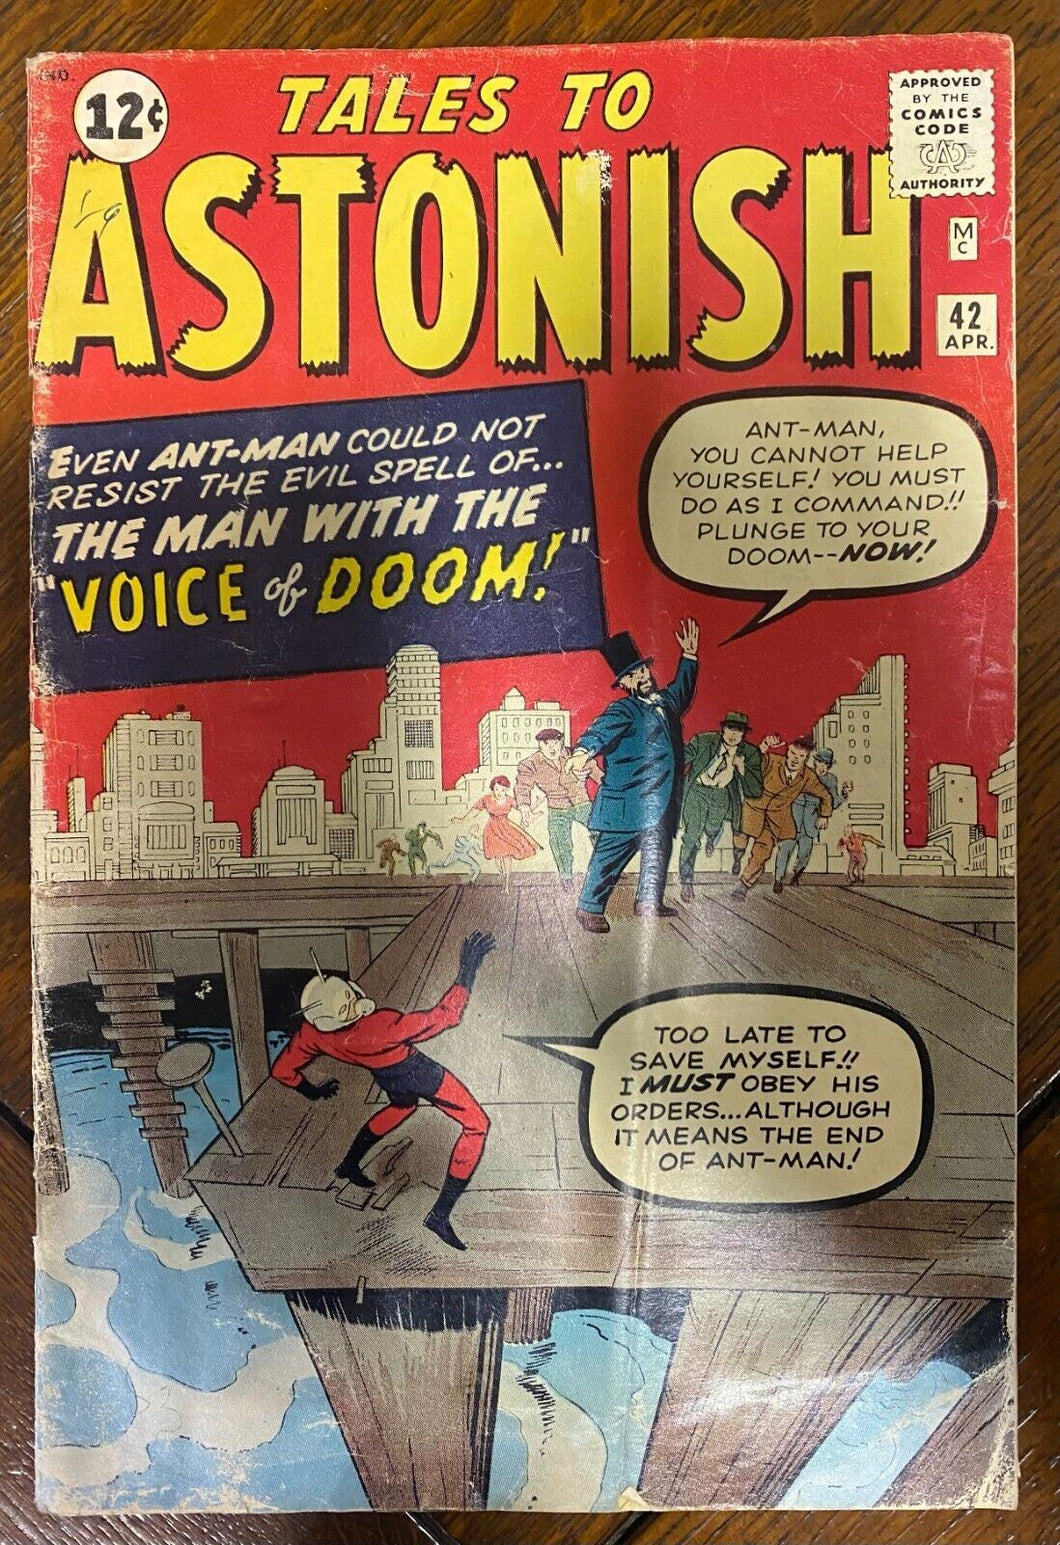 1959 Tales of Astonish Issue 42 April